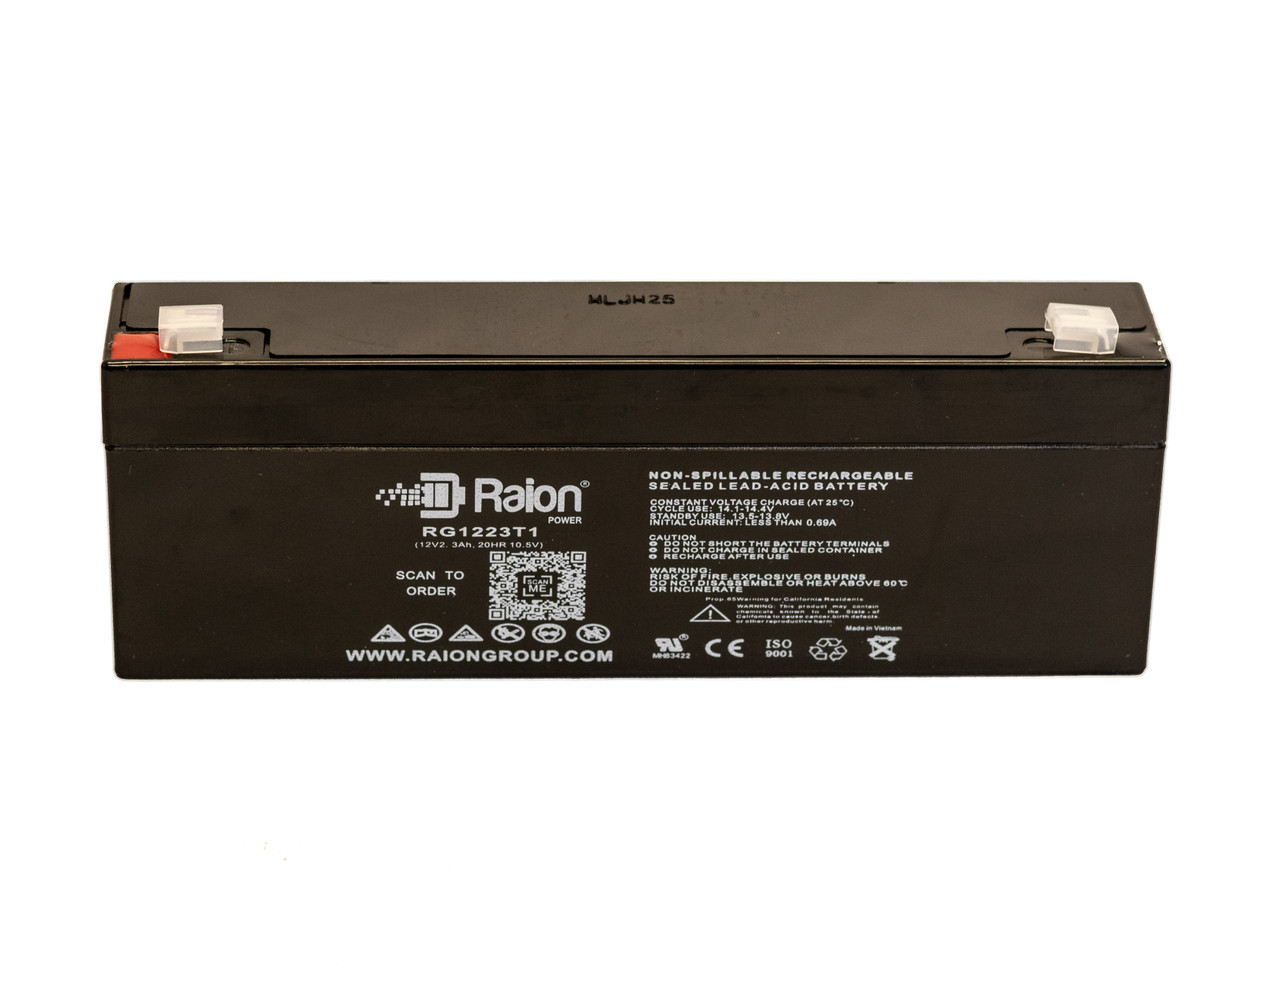 Raion Power 12V 2.3Ah SLA Battery With T1 Terminals For Zimmer ATS 1200 Tourniquet